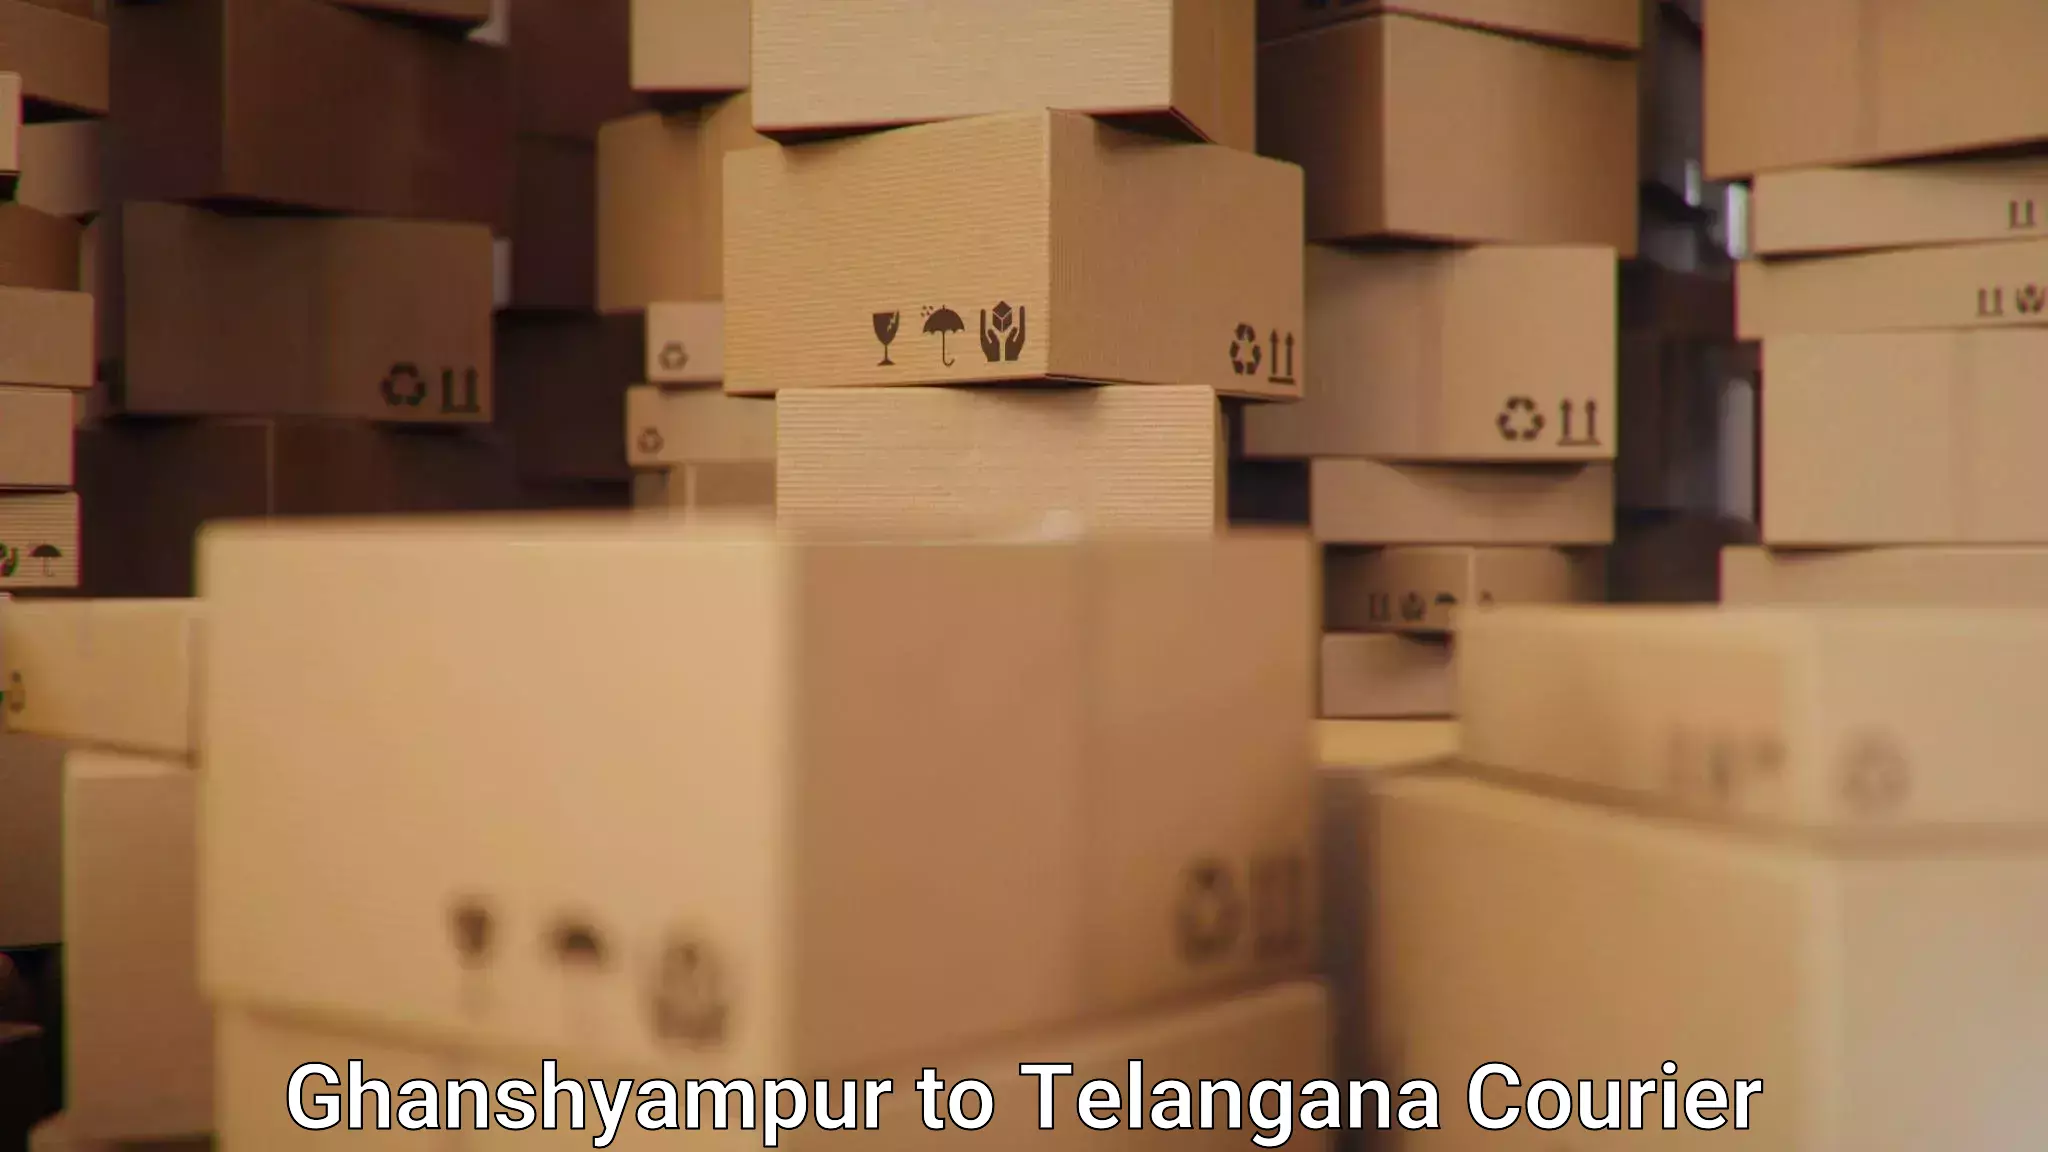 Emergency parcel delivery in Ghanshyampur to Sultanabad